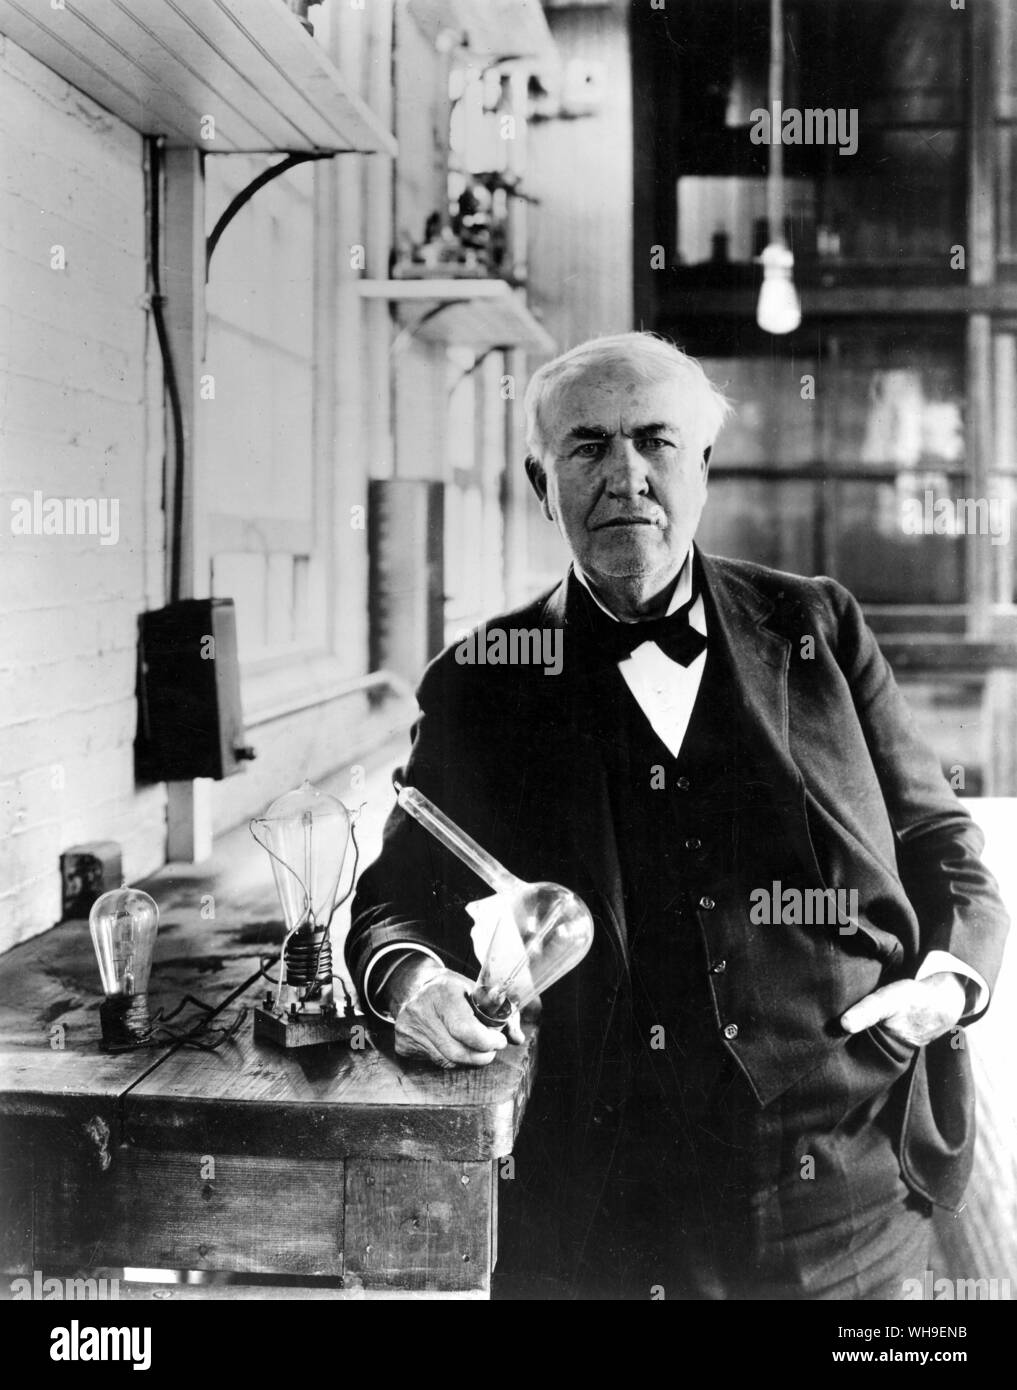 Thomas A Edison (1847-1931), US scientist and inventor, with over 1000 patents. In 1889 he formed the Edison Light Company. He stands here with some of his Edison Effect lamps. Stock Photo